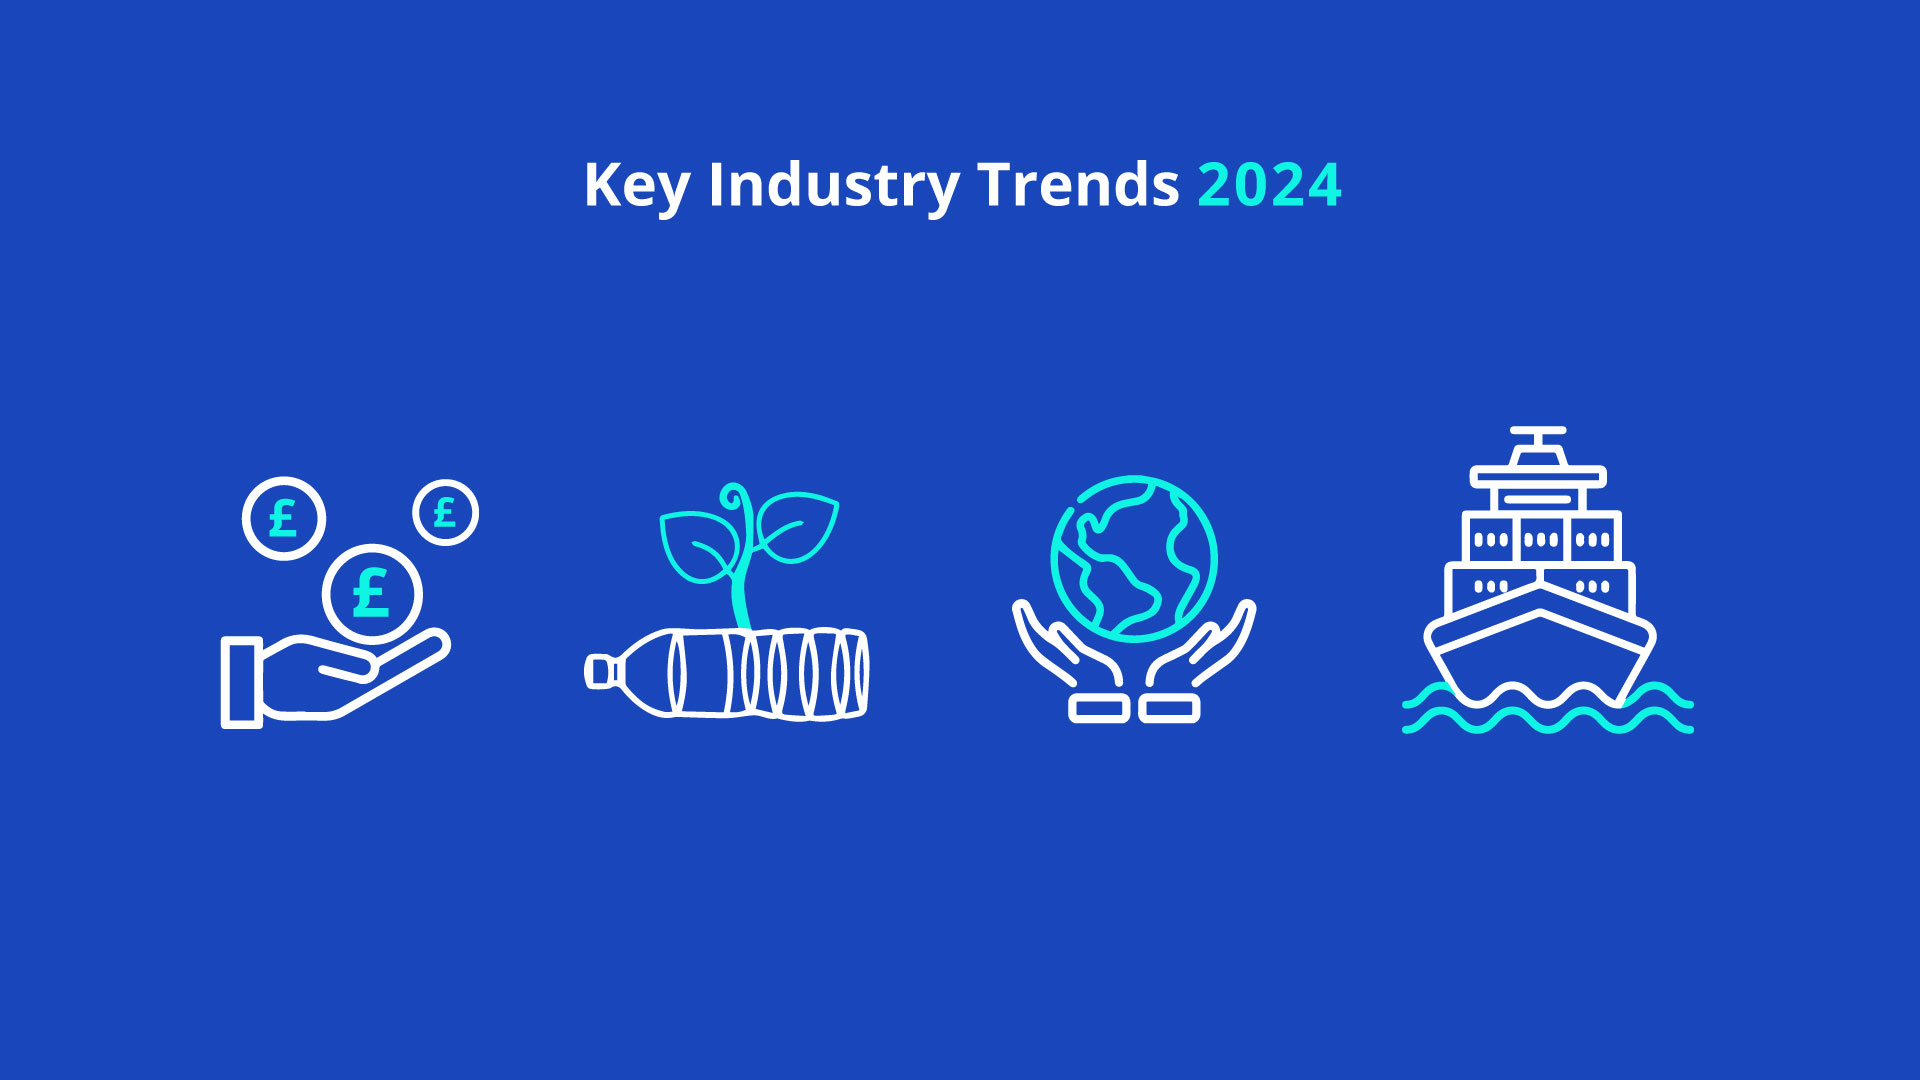 2024 customer research highlights key industry trends